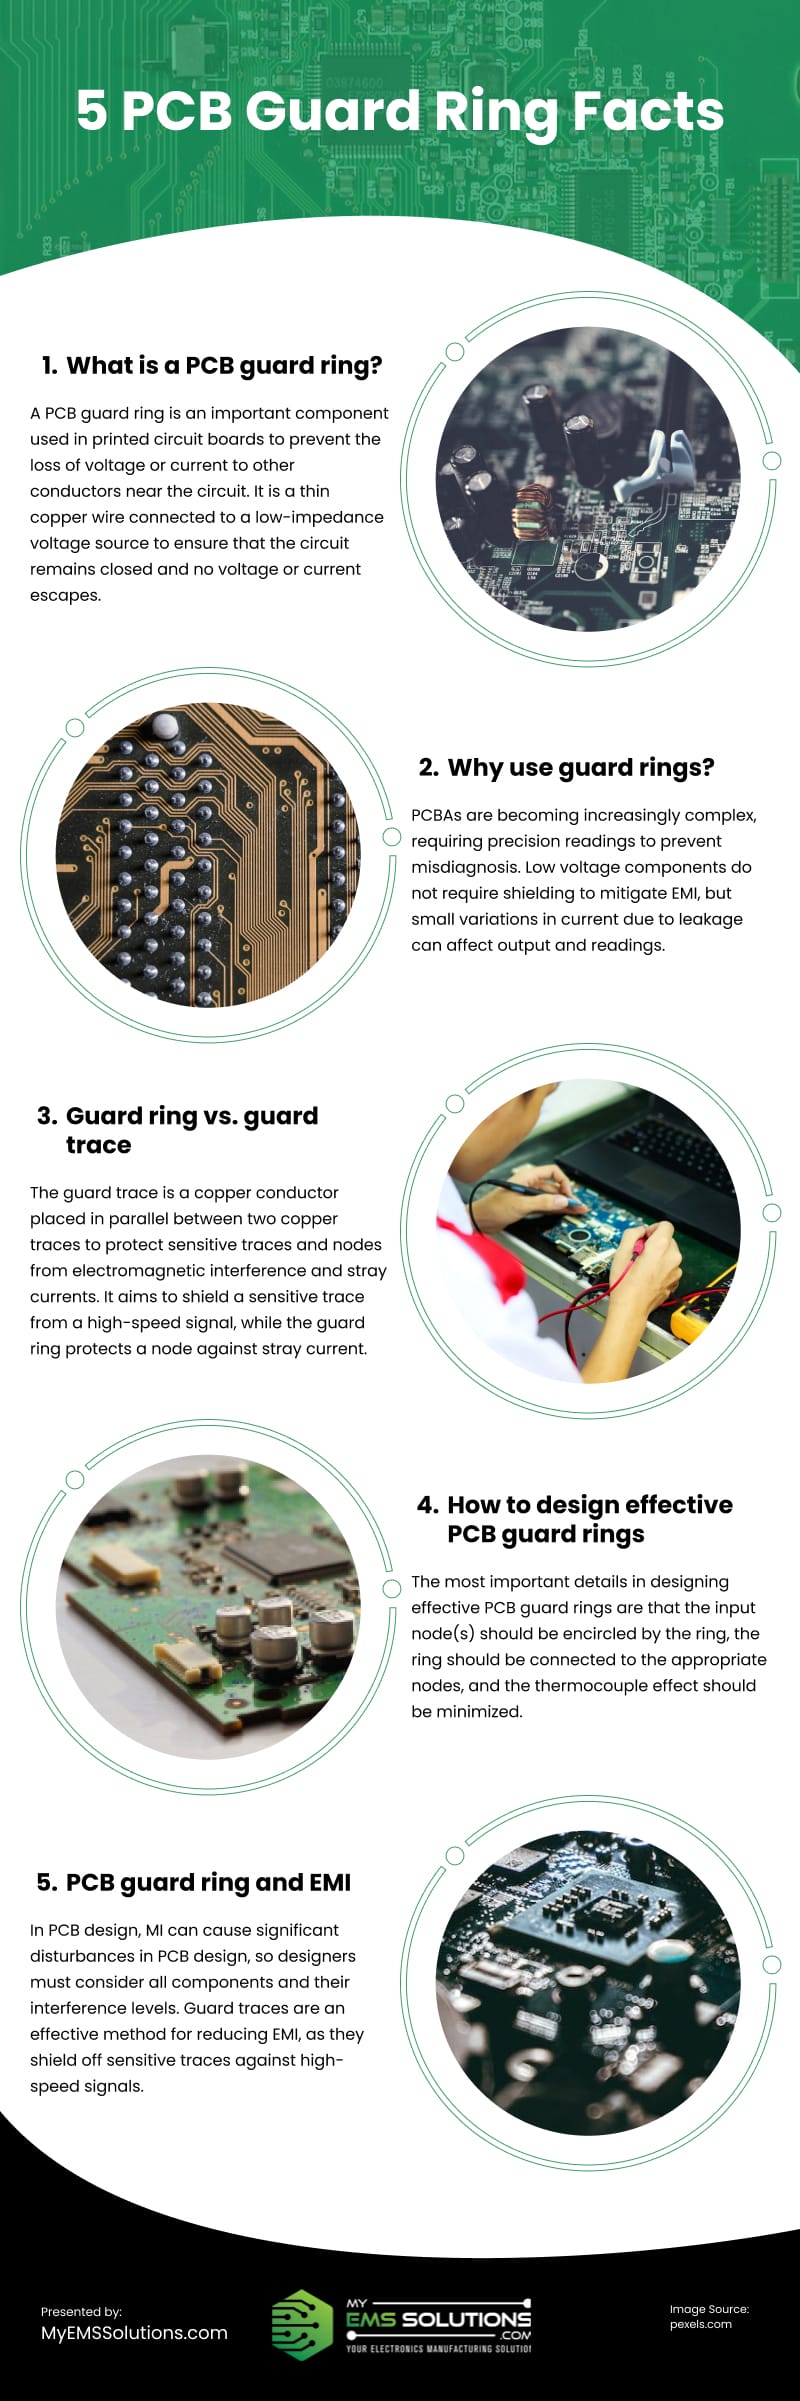 5 PCB Guard Ring Facts Infographic